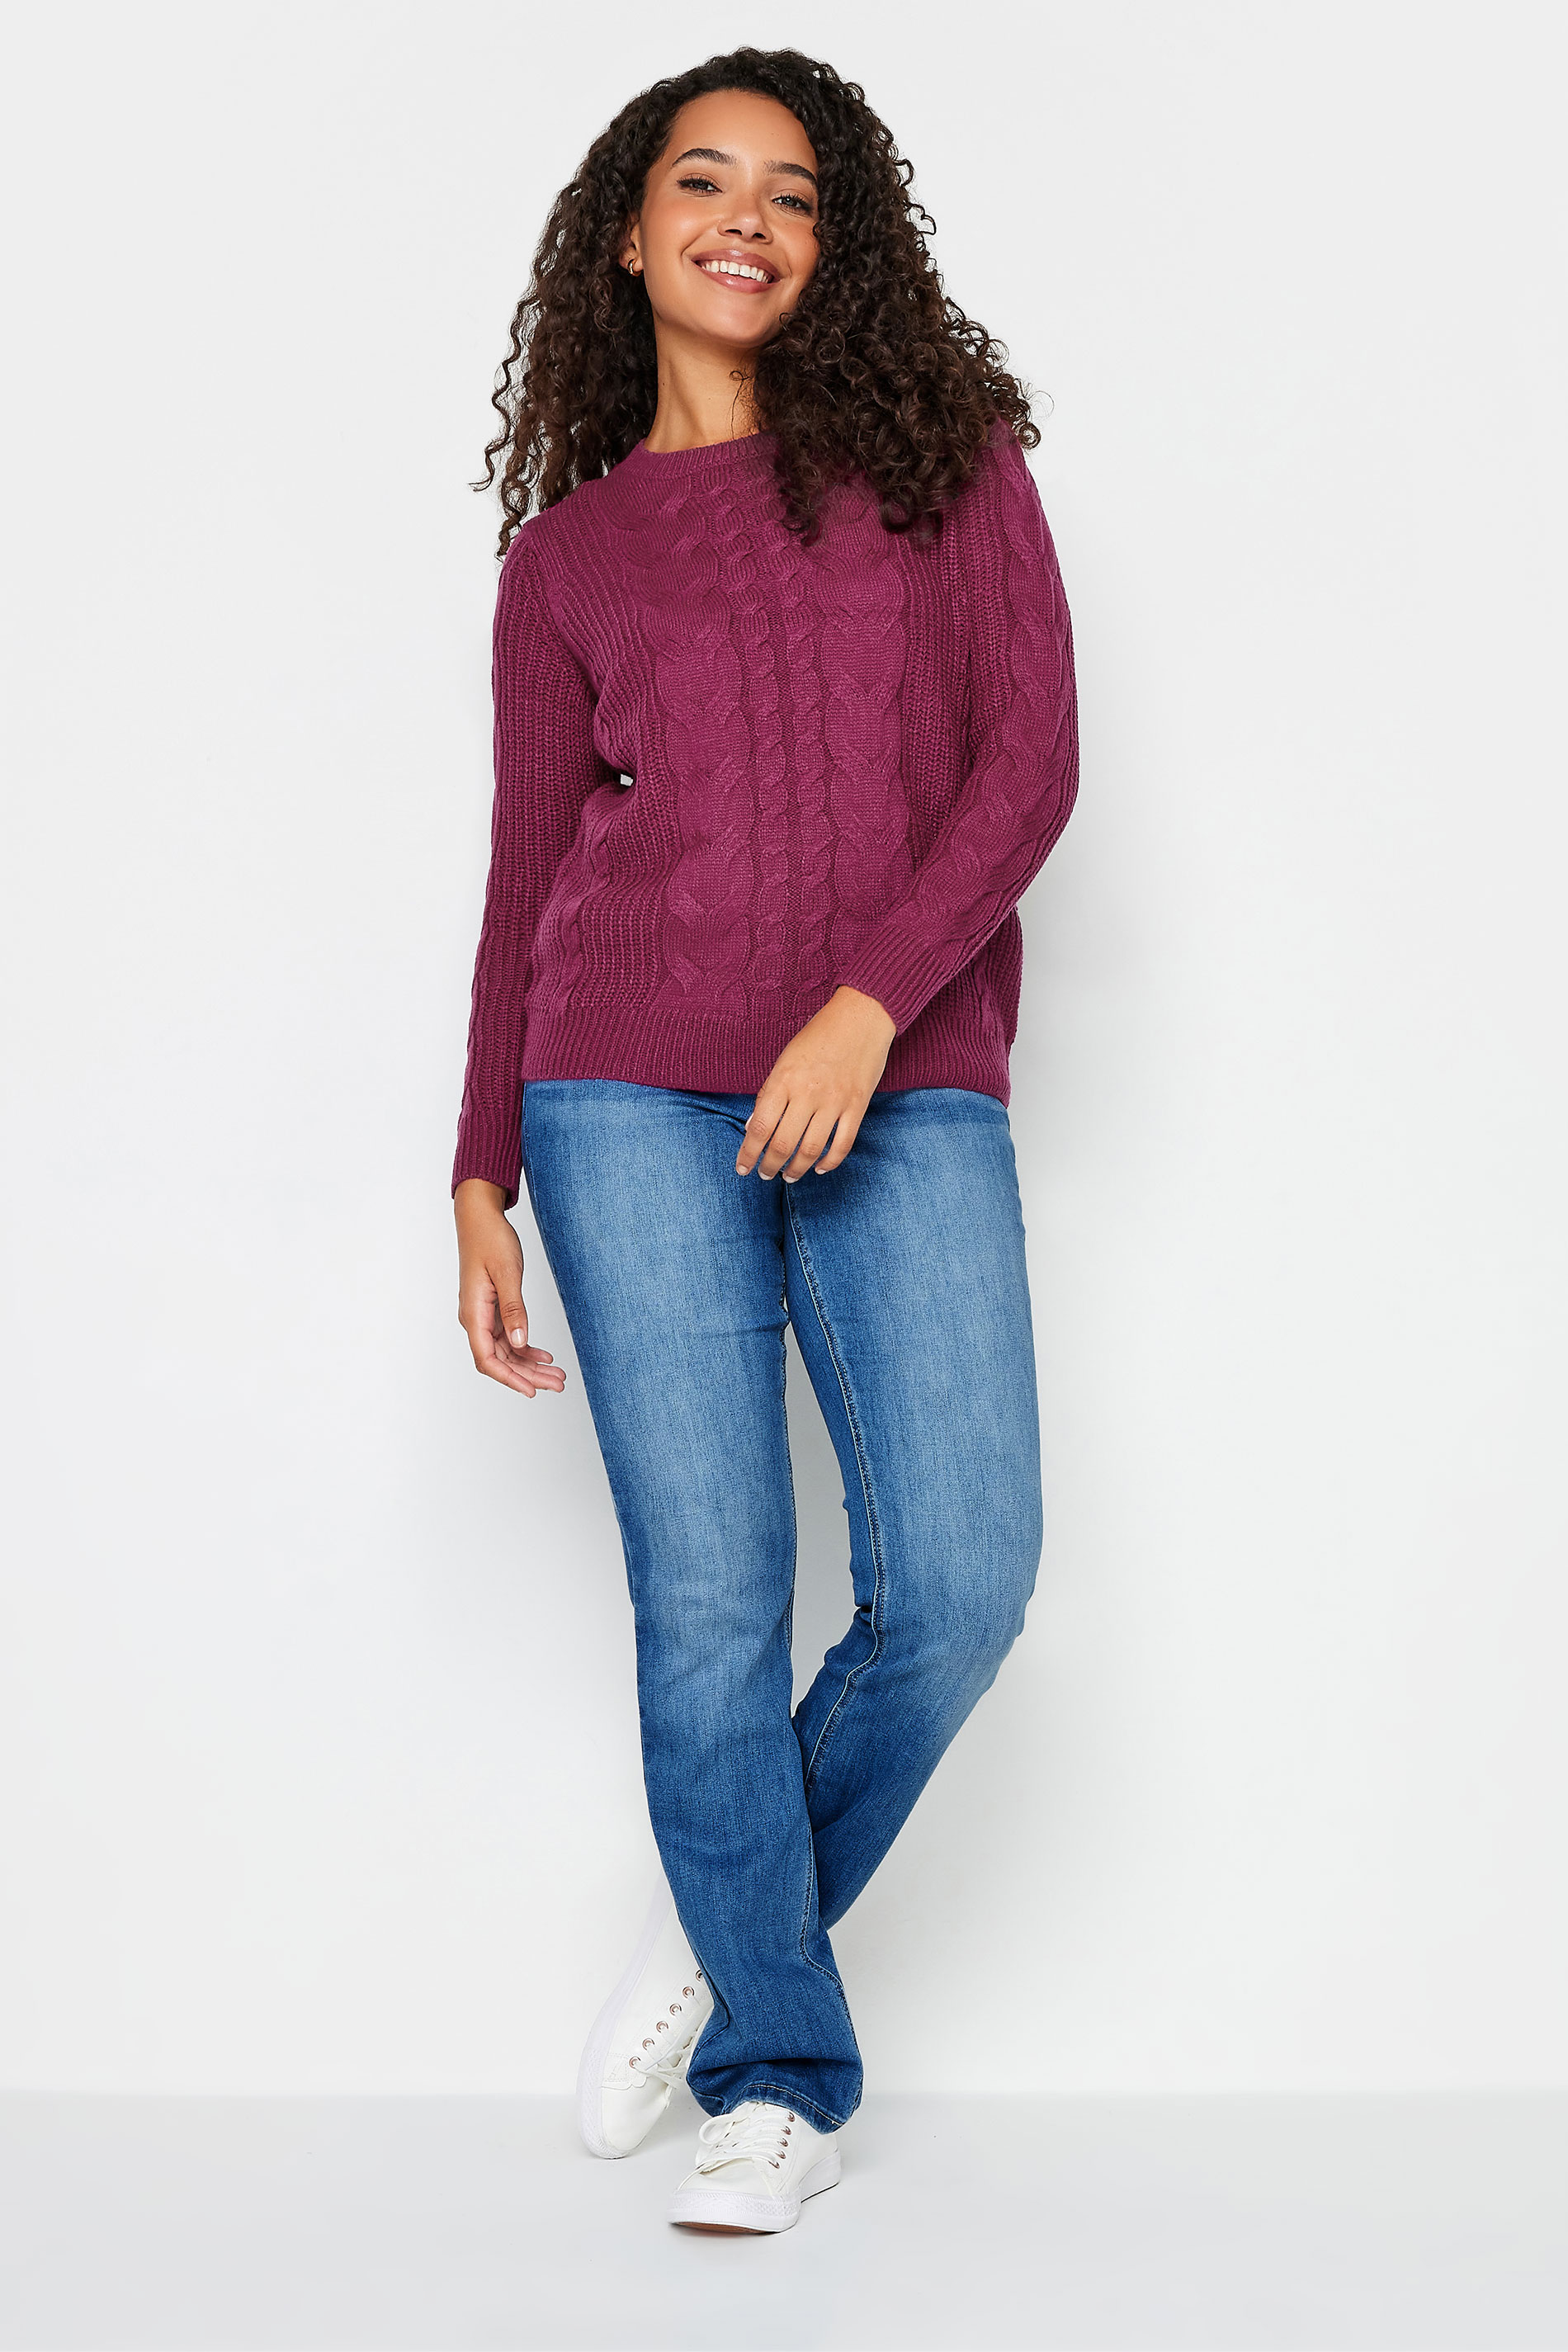 M&Co Dark Pink Cable Knit Jumper | M&Co 2